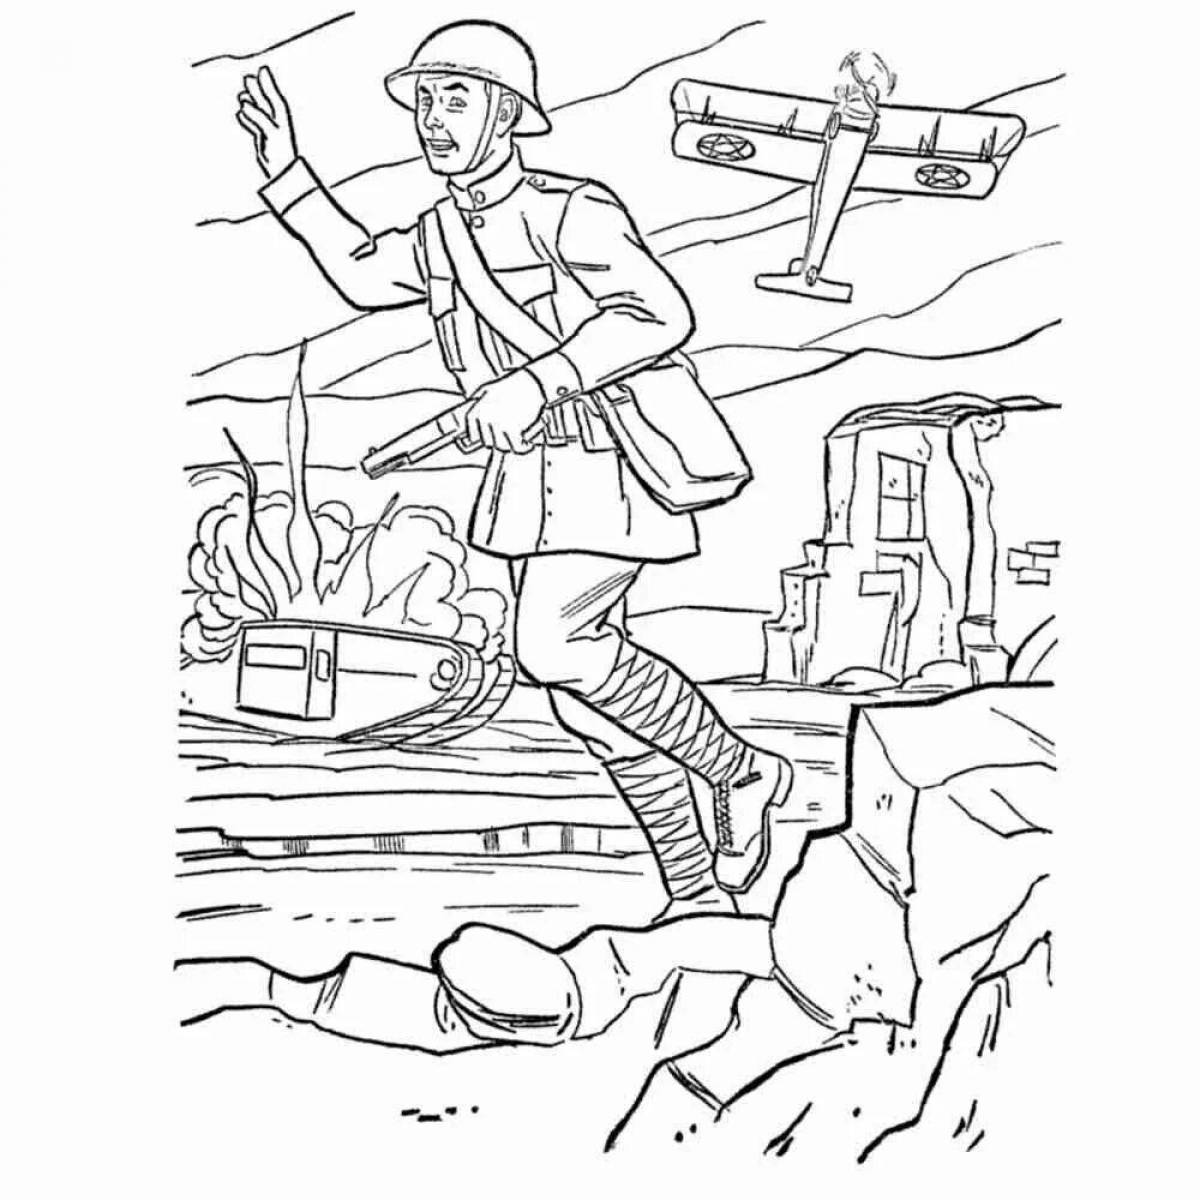 Impressive military coloring pages for kids